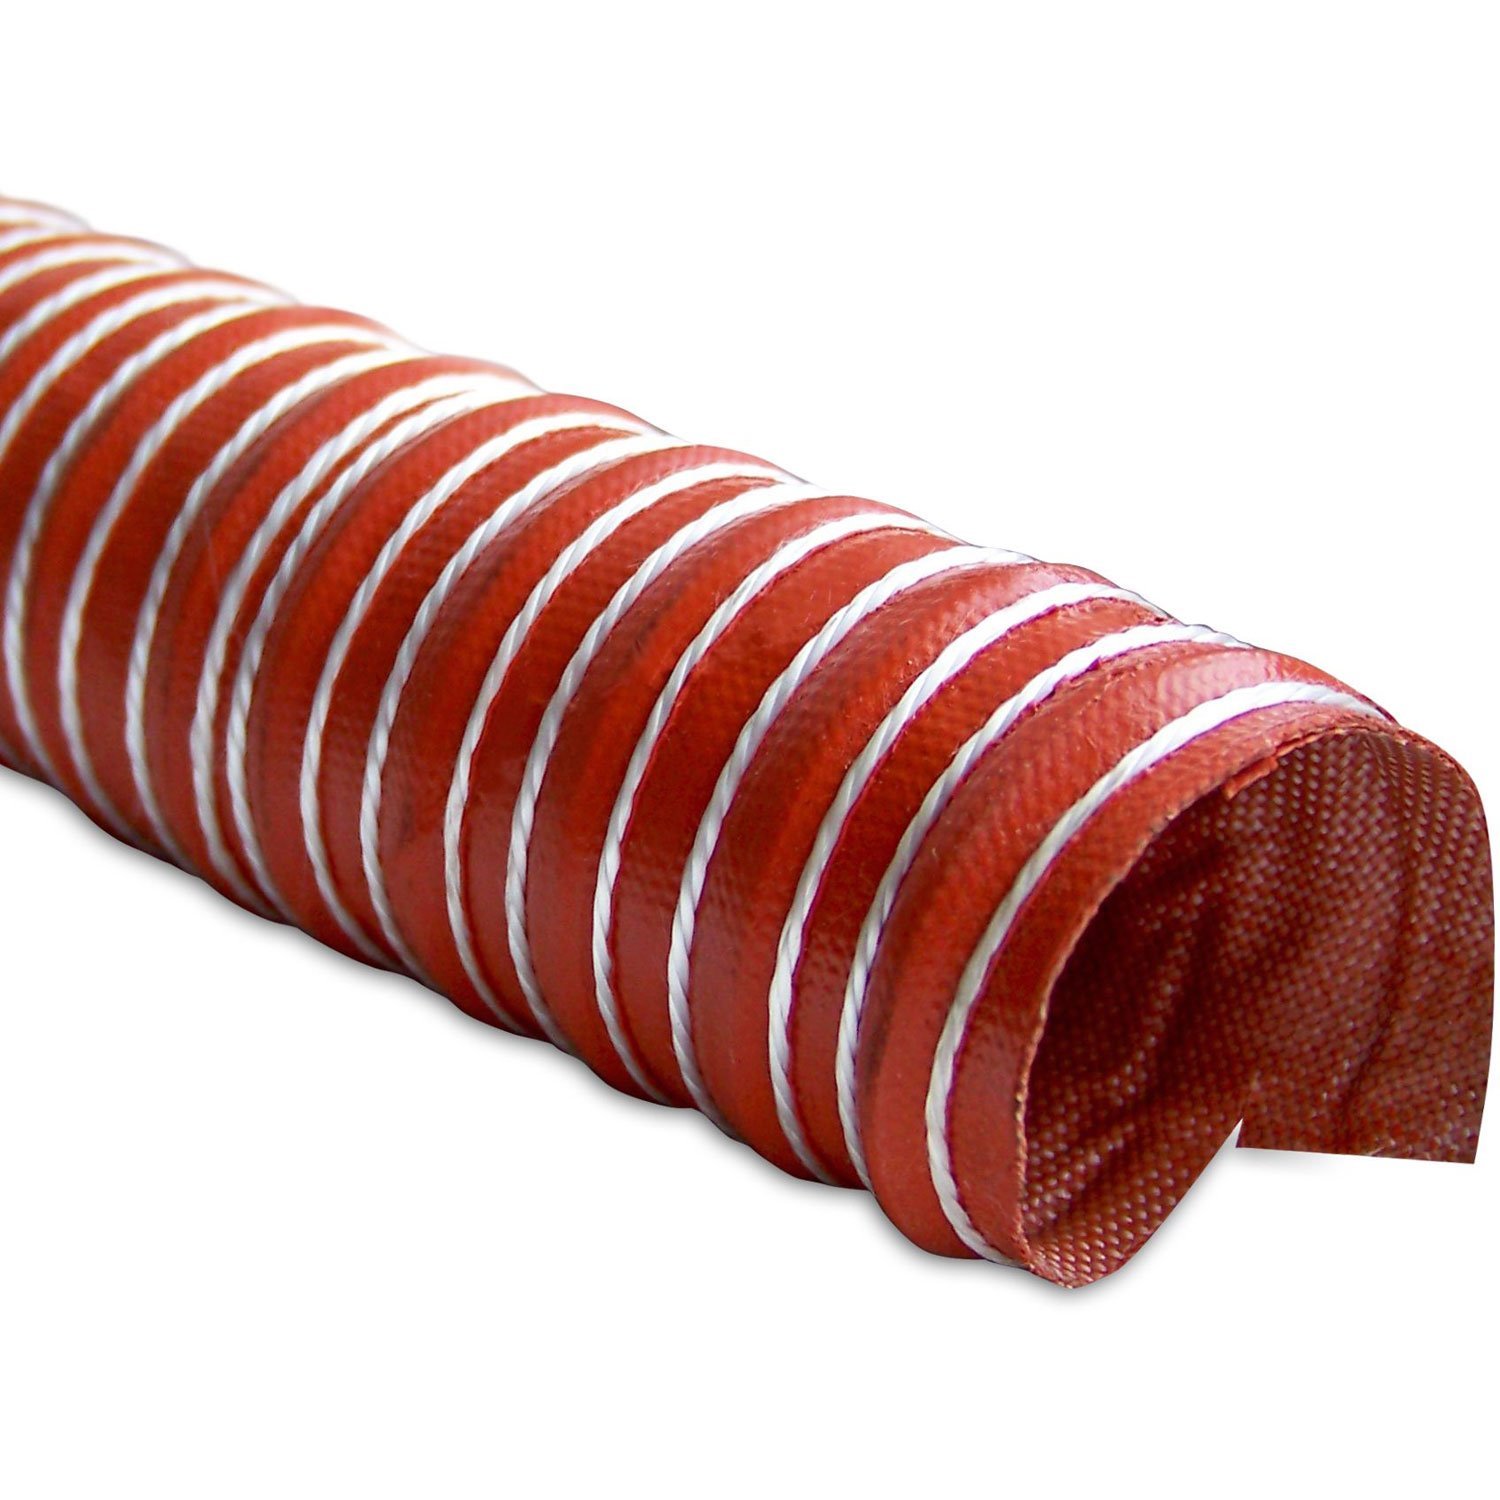 Heat Resistant Silicone Ducting 2 x 12 - MFG Part No. MMHOSE-D2